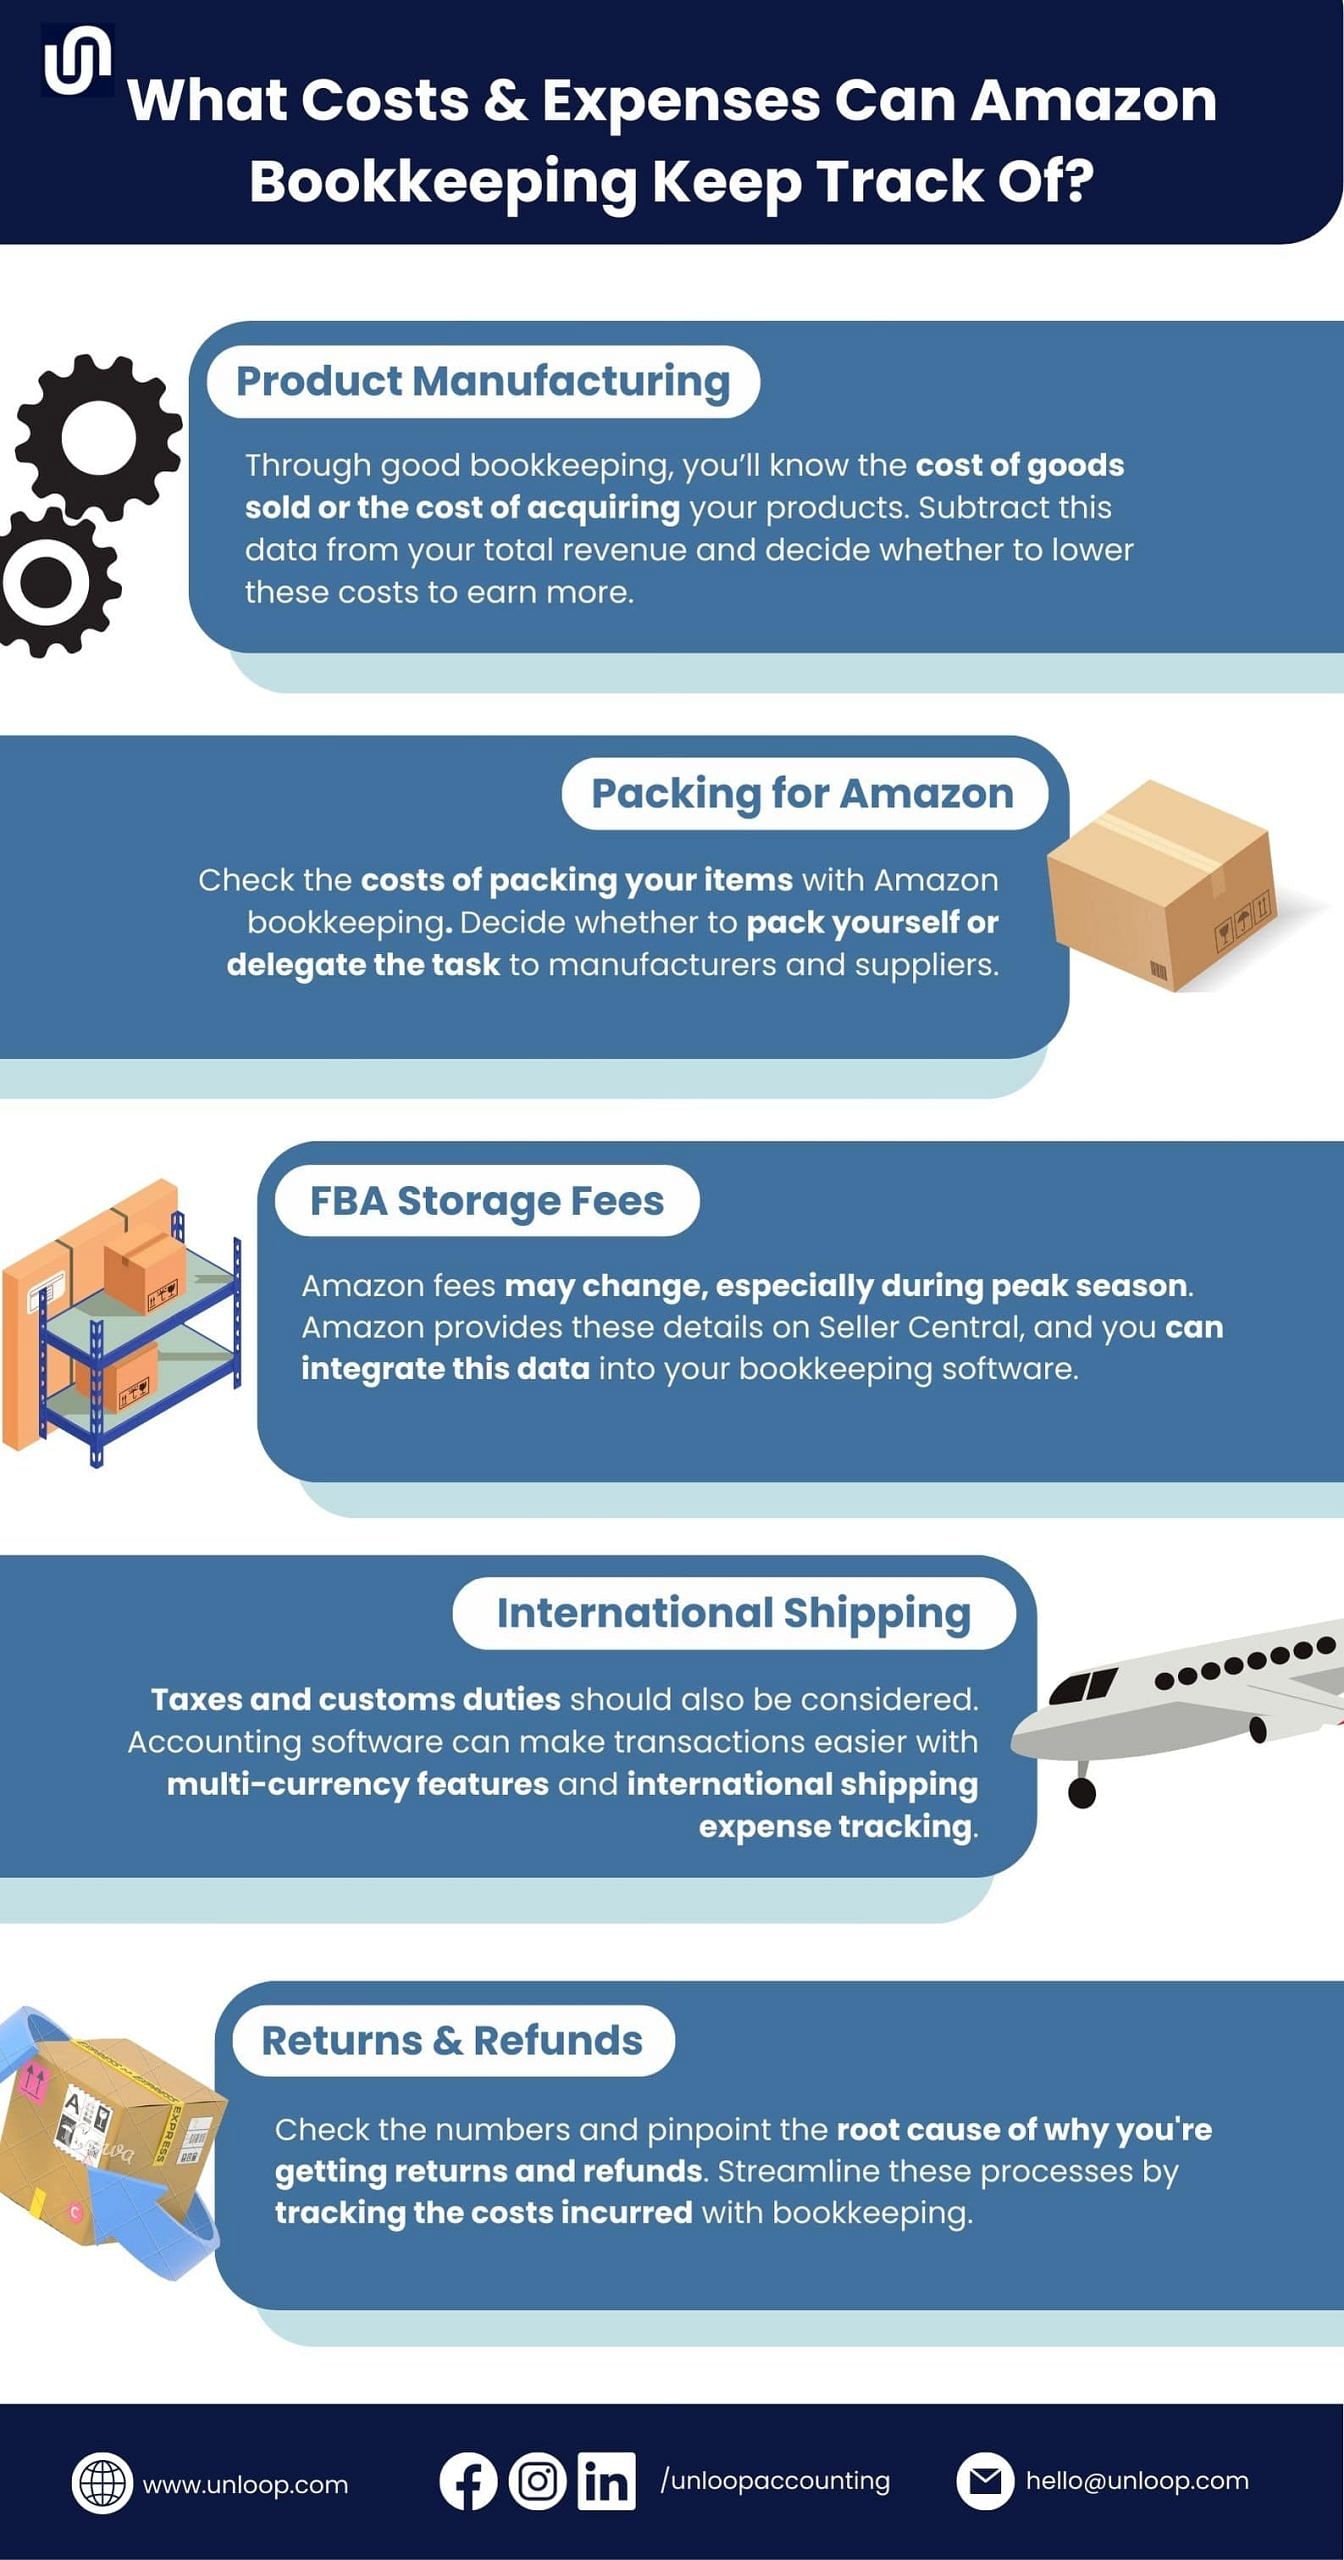 short infographic about how Amazon bookkeeping can keep track of costs and expenses